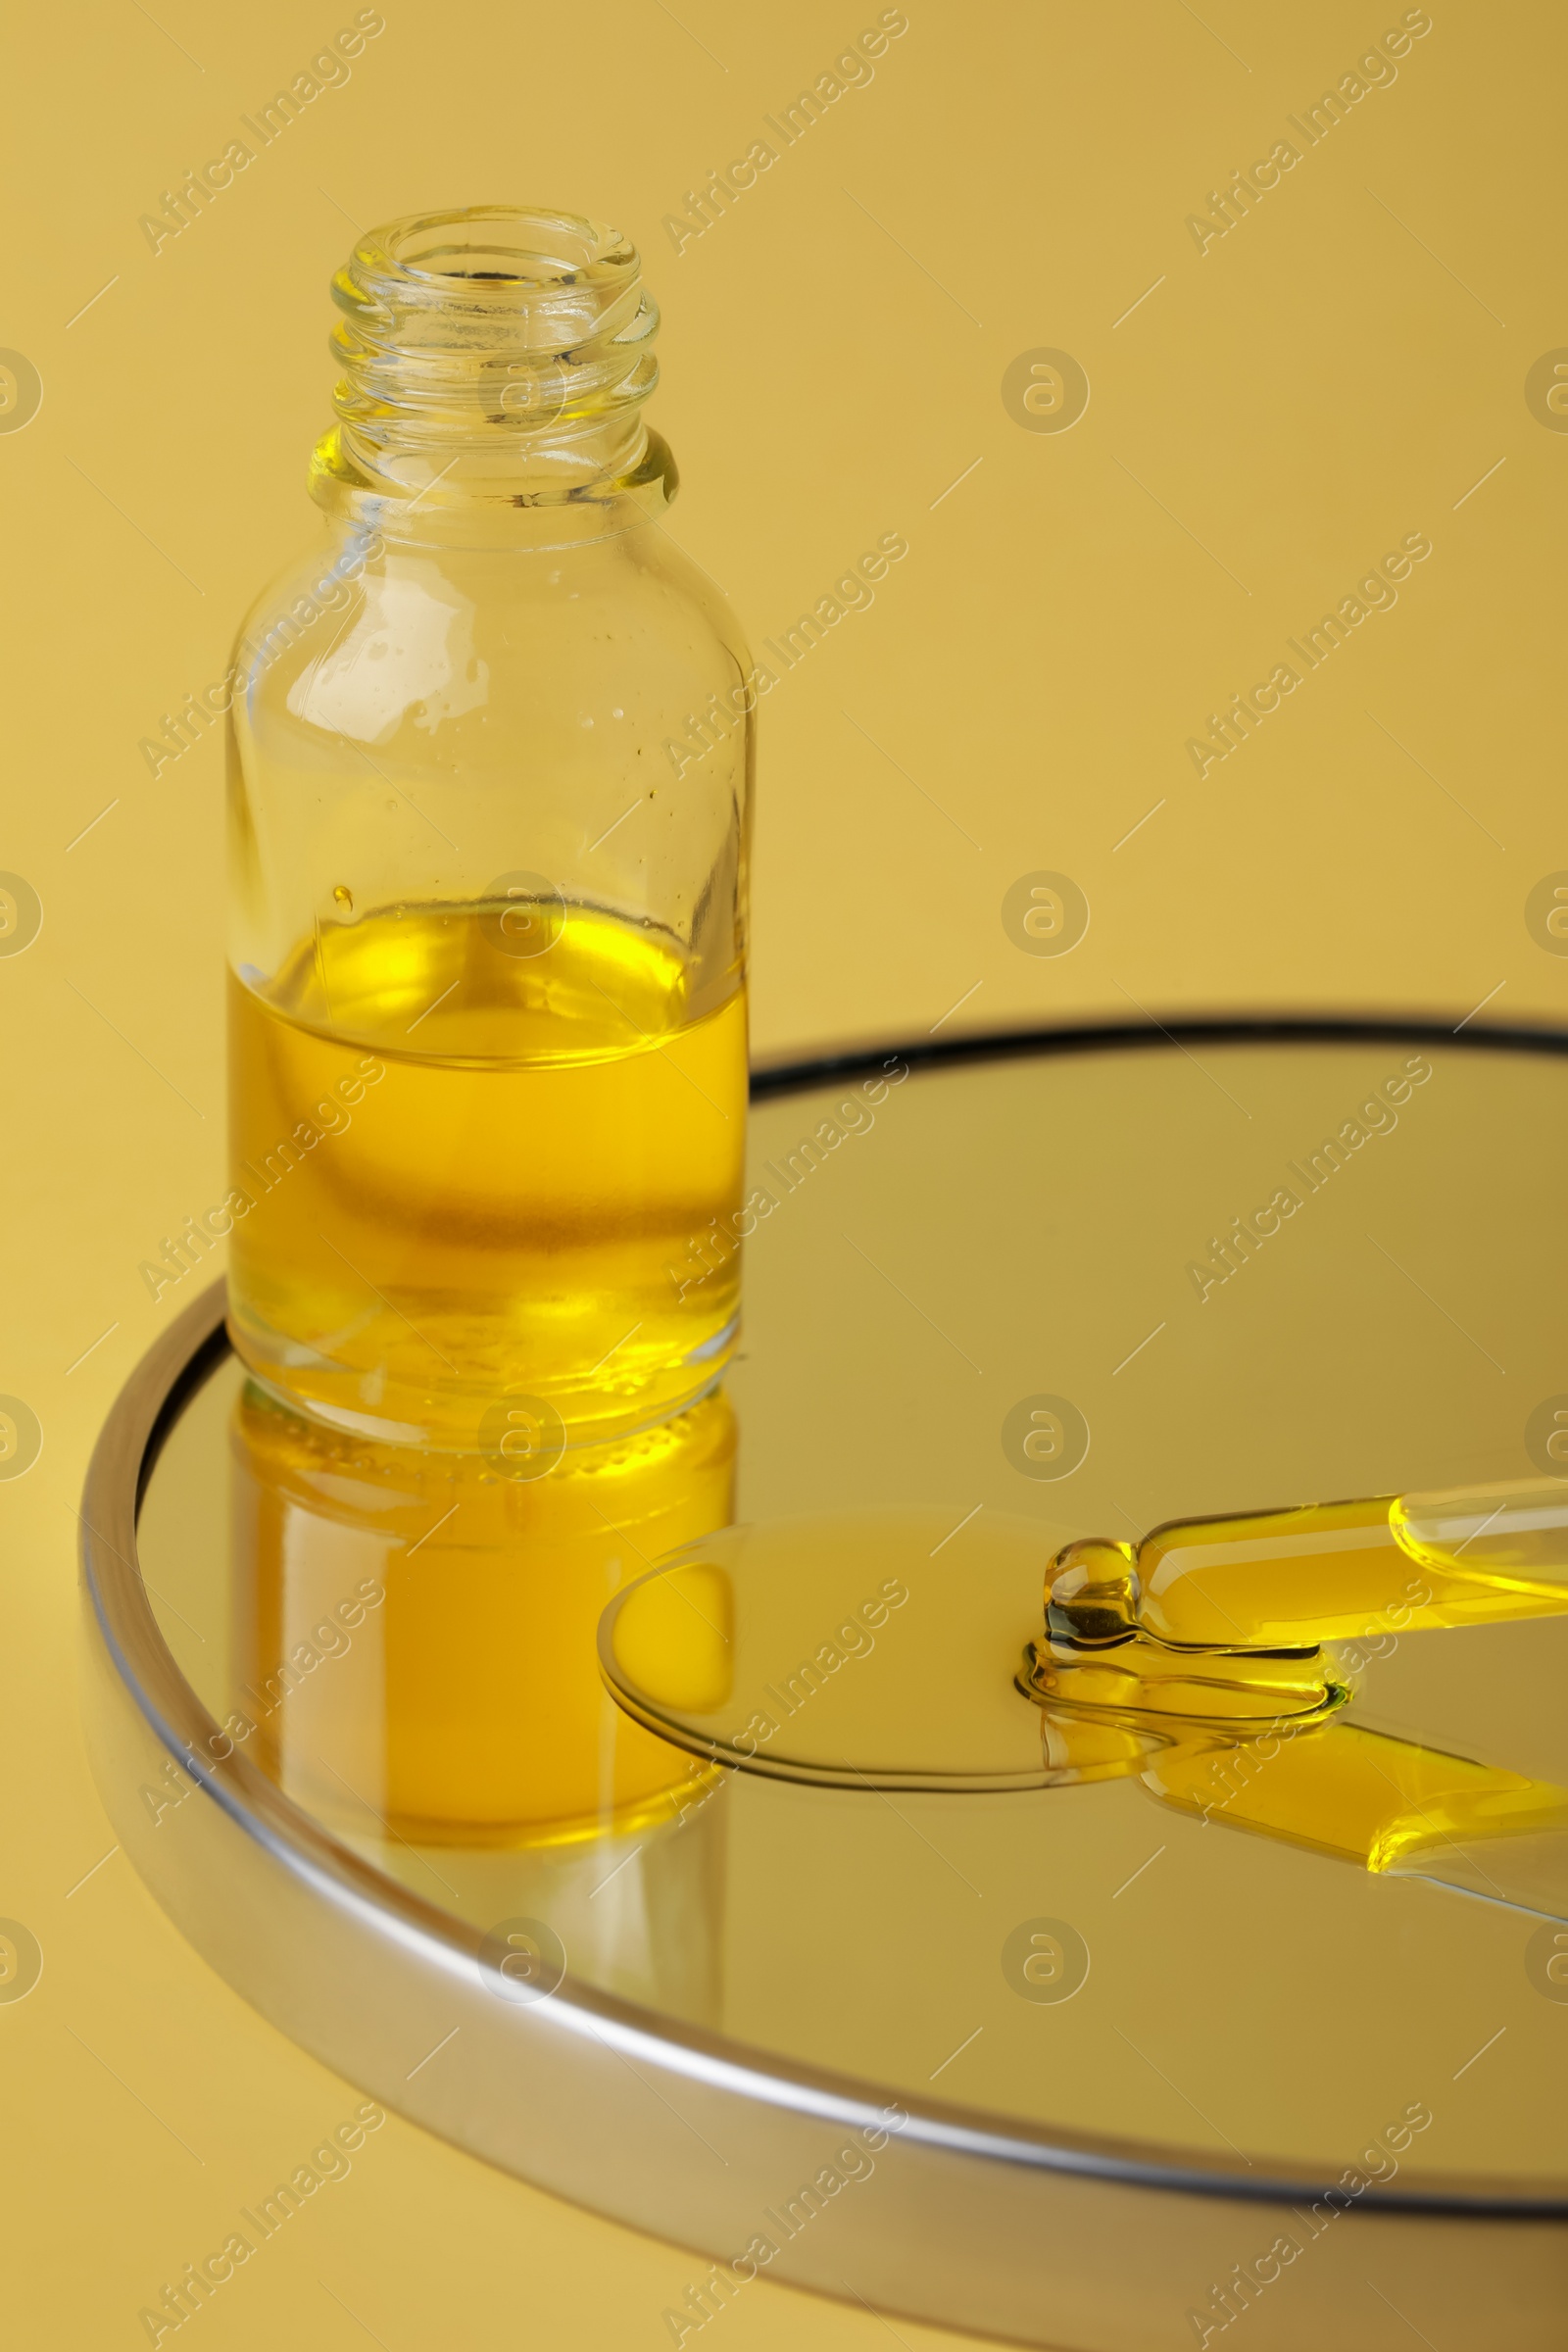 Photo of Bottle of face serum on mirror against yellow background